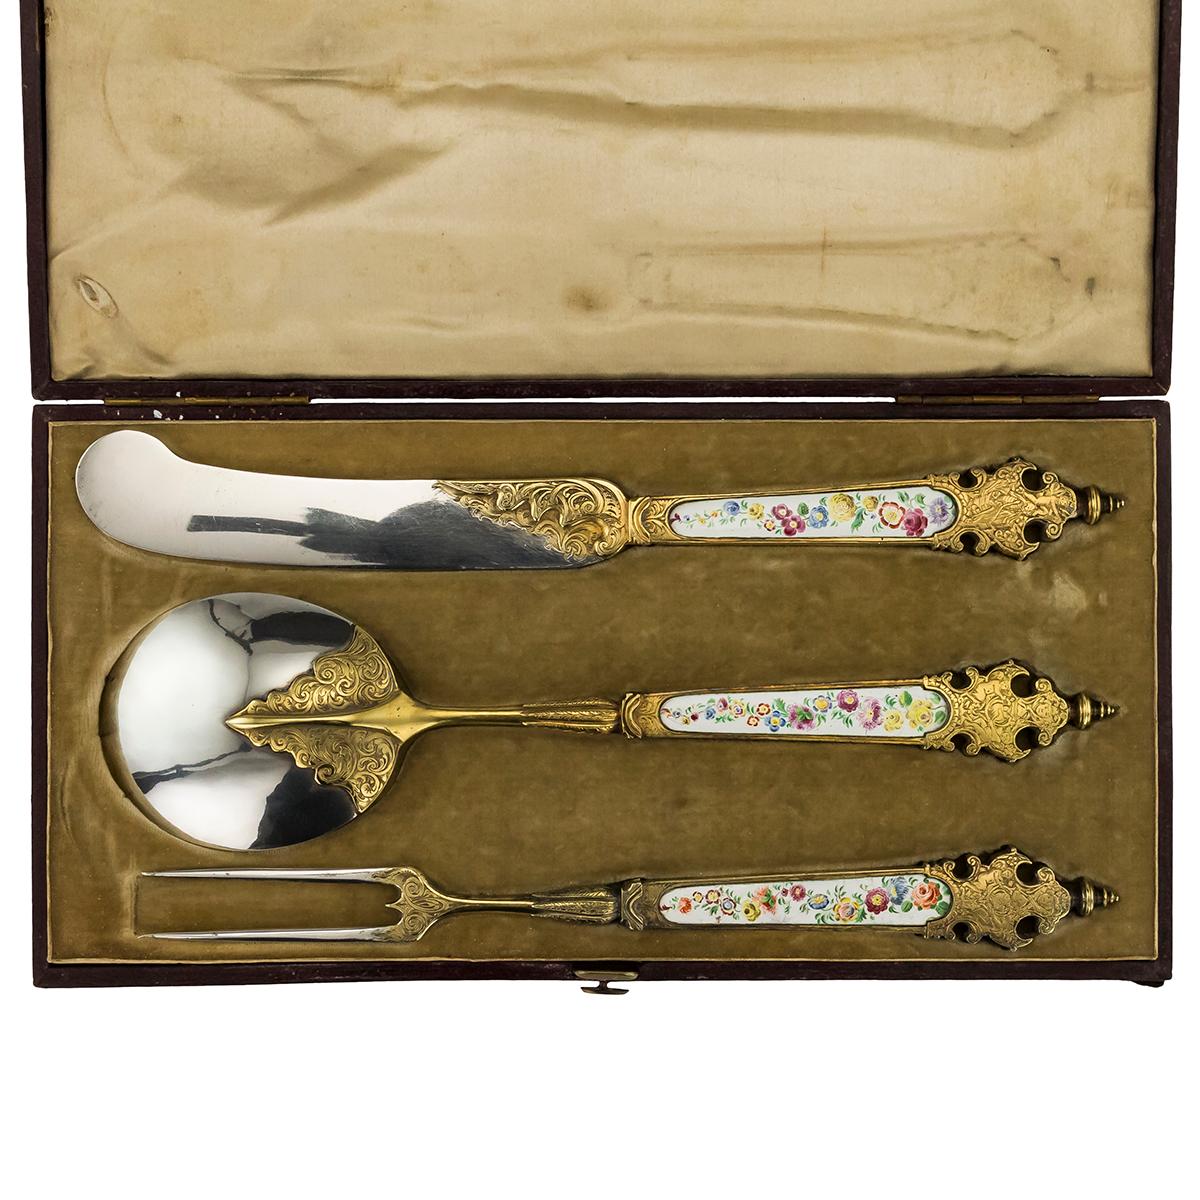 Antique mid-19th century German solid silver traveling cutlery set, made in the style of the early 17th century Augsburg examples, the set comprising a fork, a knife and a spoon, each richly gilt and beautifully engraved, handles mounted with enamel